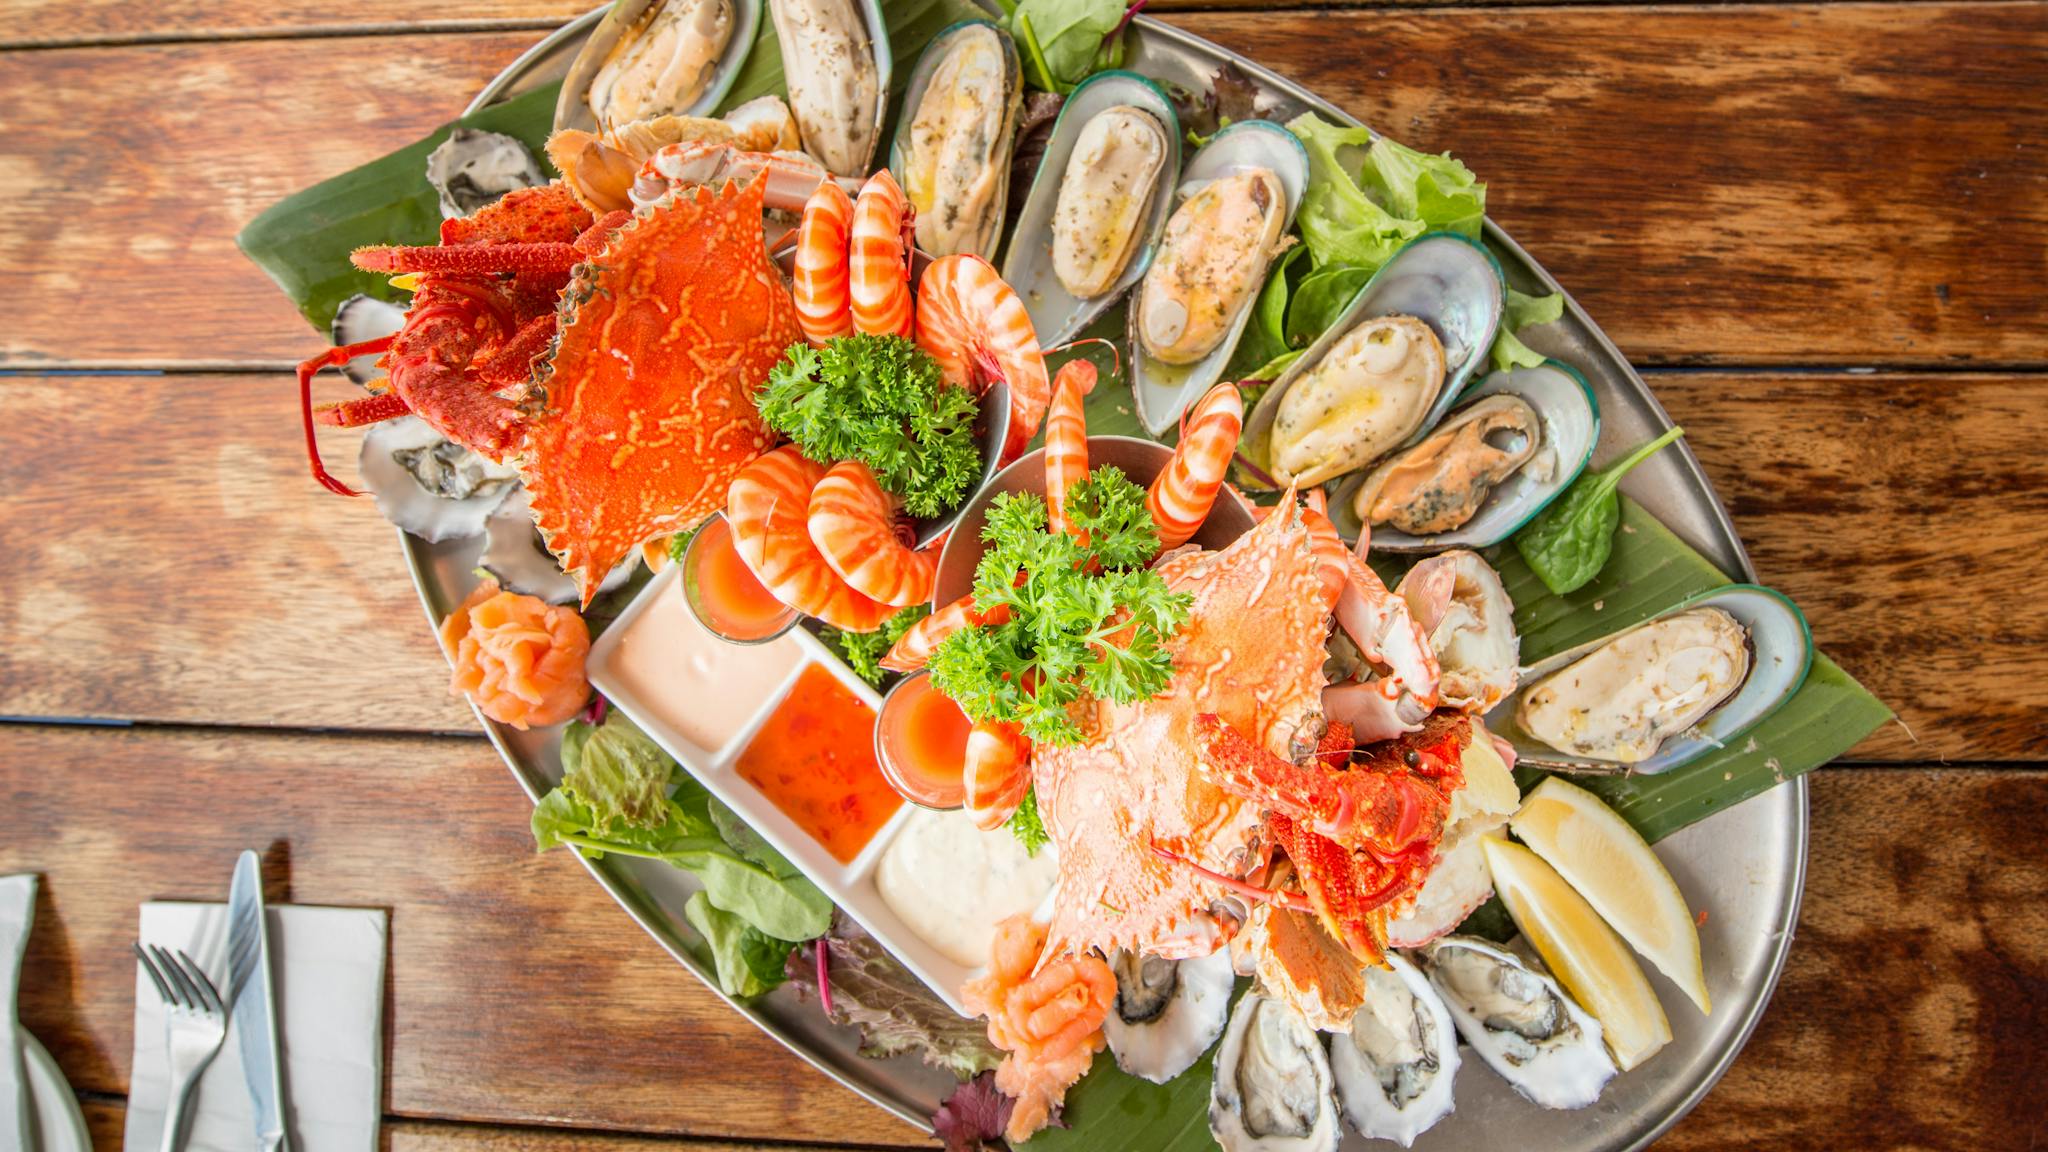 Deluxe Seafood Platter for 2